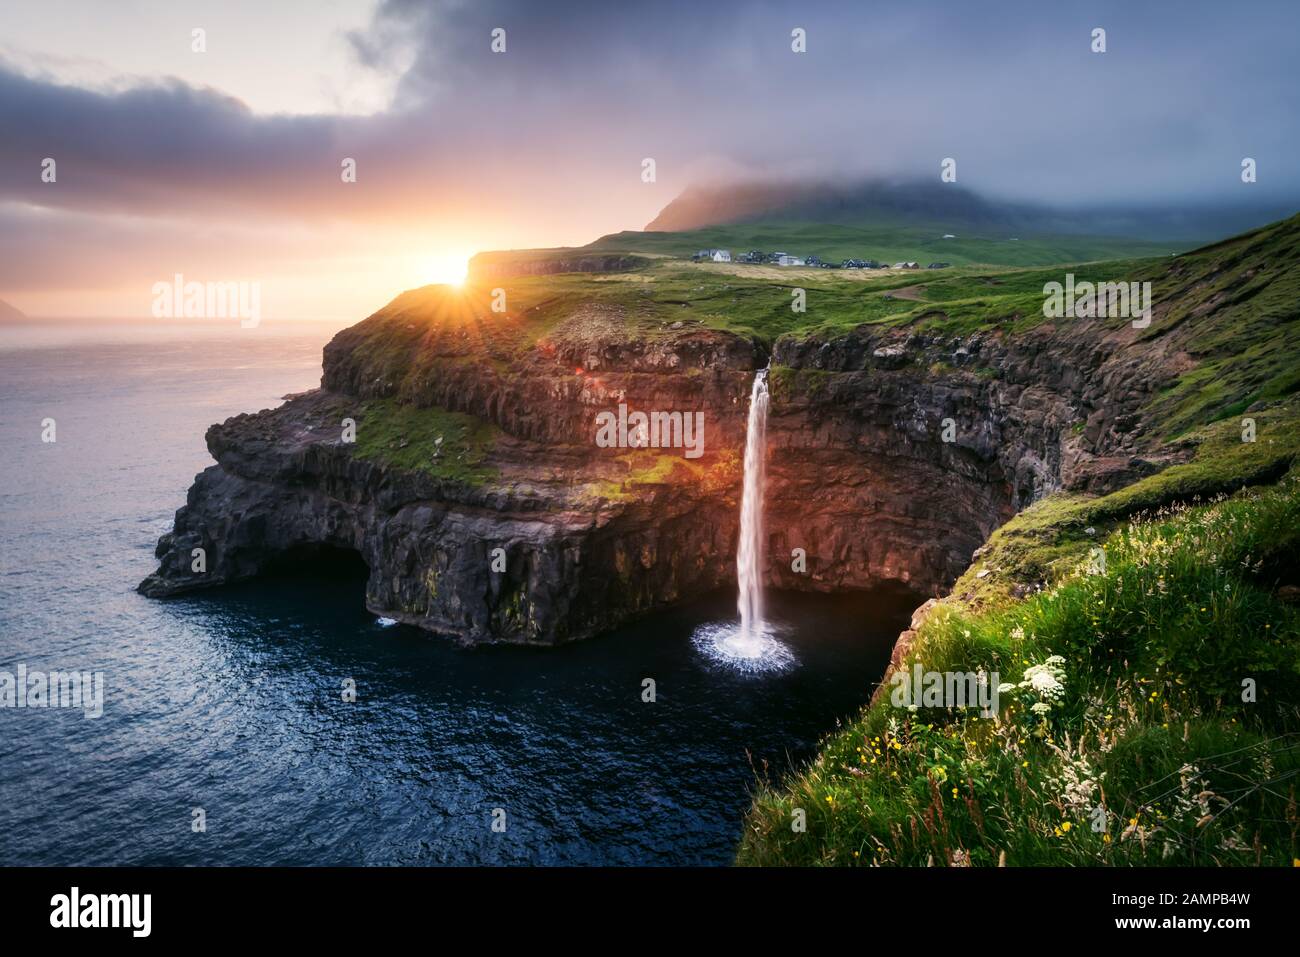 Incredible sunset view of Mulafossur waterfall in Gasadalur village, Vagar Island of the Faroe Islands, Denmark. Landscape photography Stock Photo